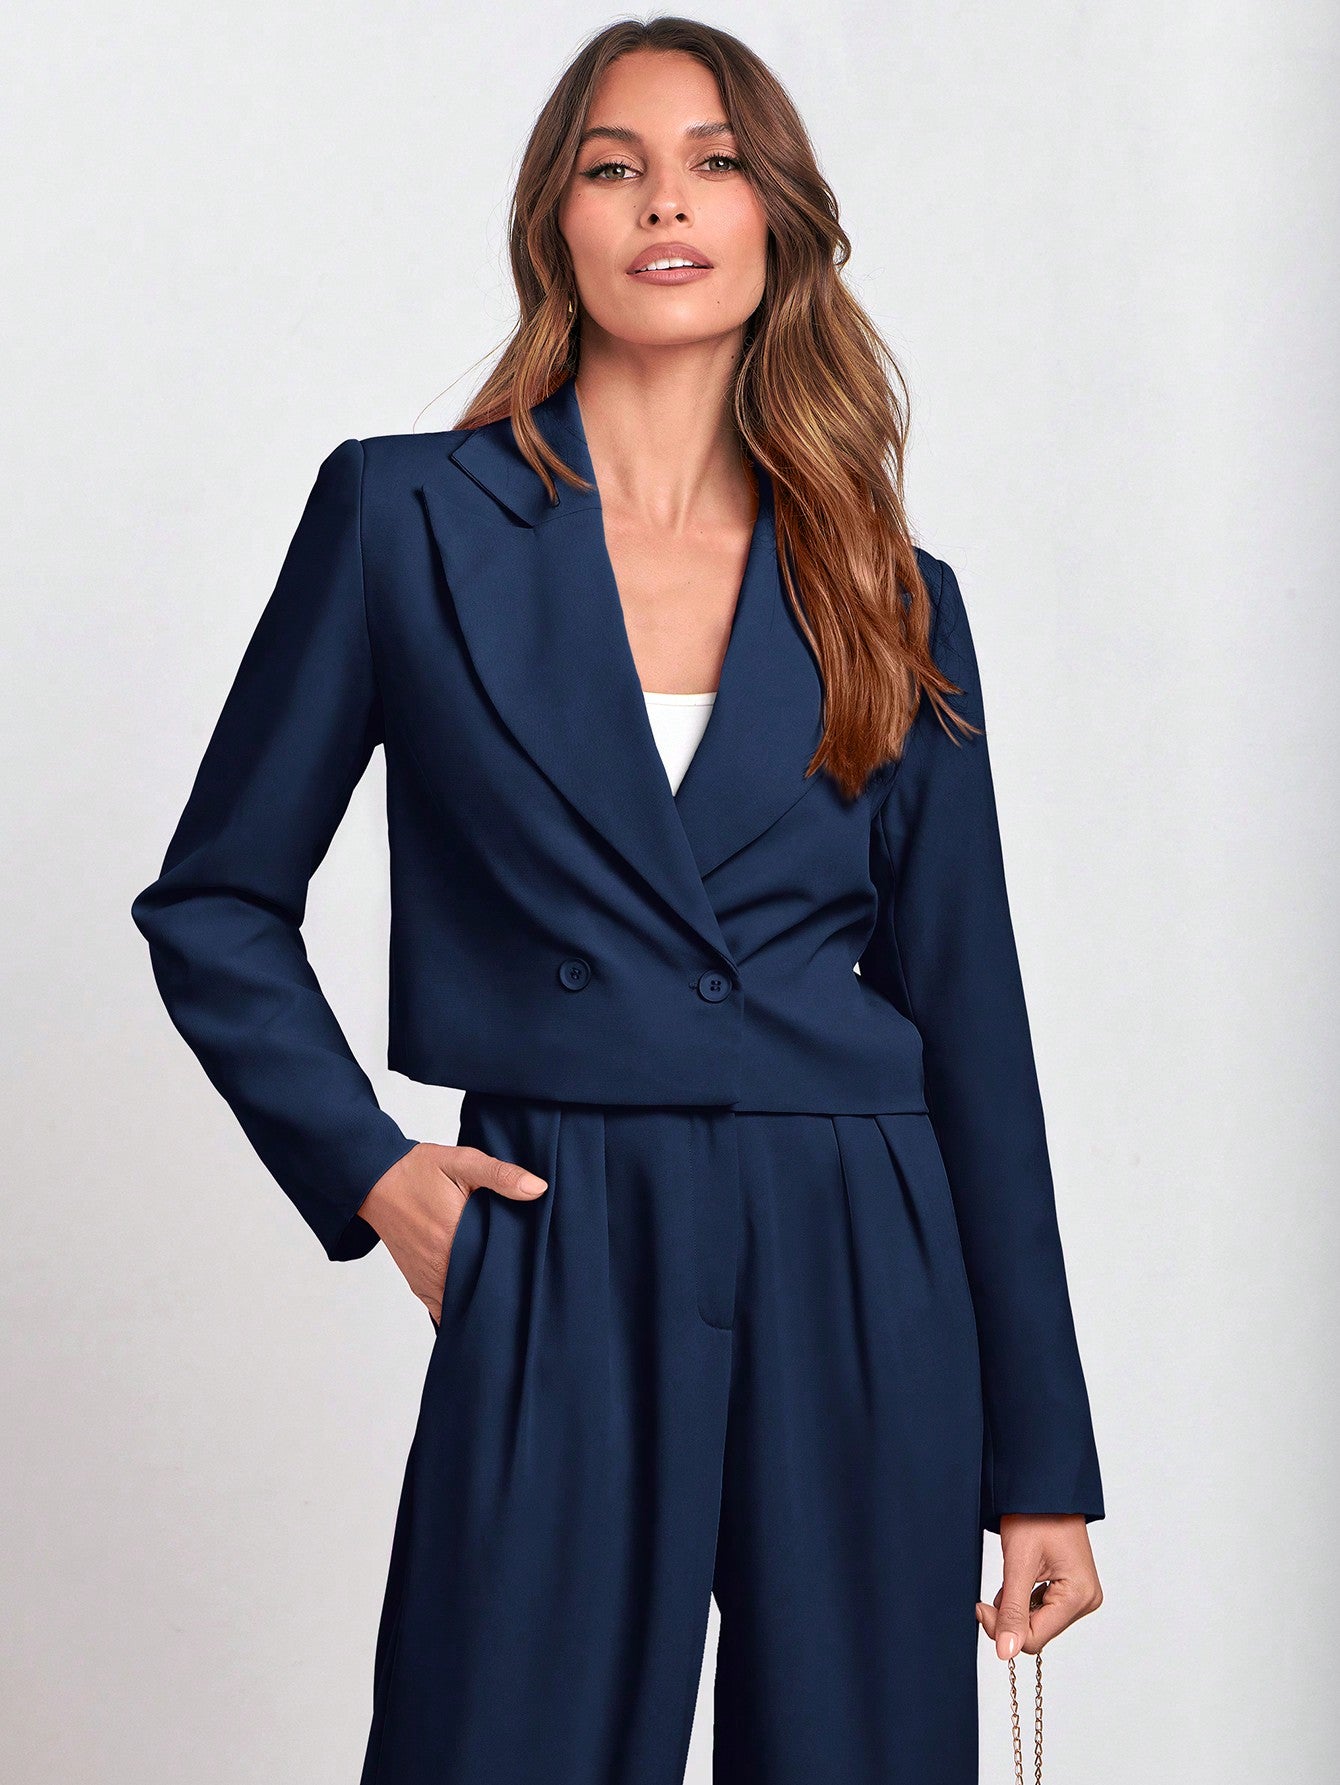 Double Button Peak Collar Blazer and Wide Leg Pants Set - A Sophisticated and Chic Ensemble